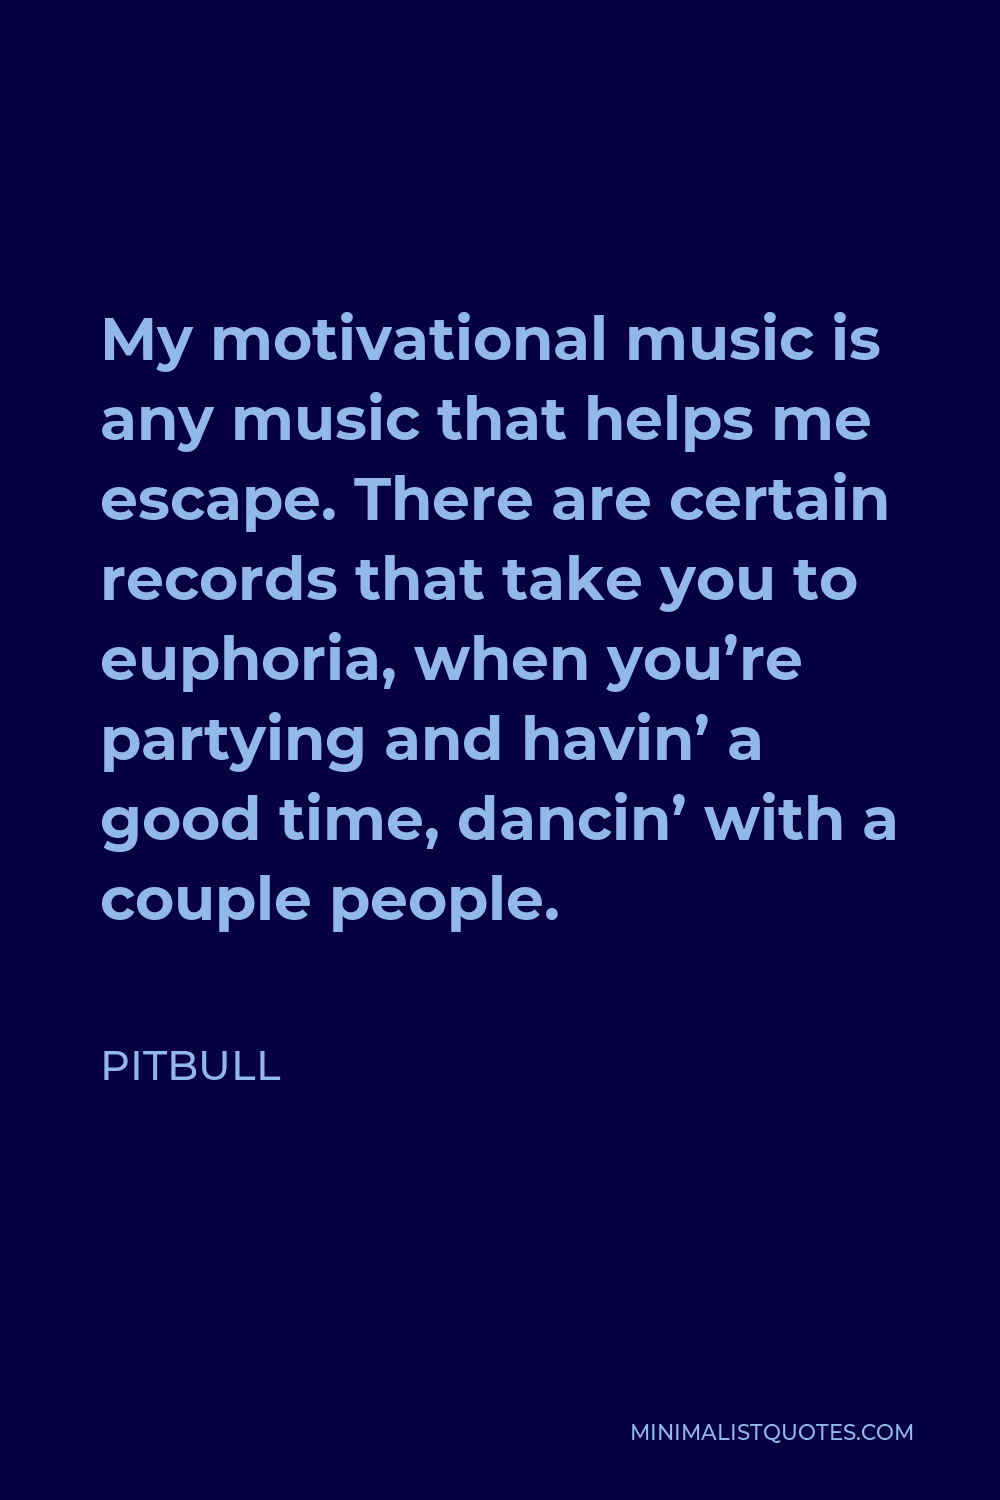 Pitbull Quote - My motivational music is any music that helps me escape. There are certain records that take you to euphoria, when you’re partying and havin’ a good time, dancin’ with a couple people.